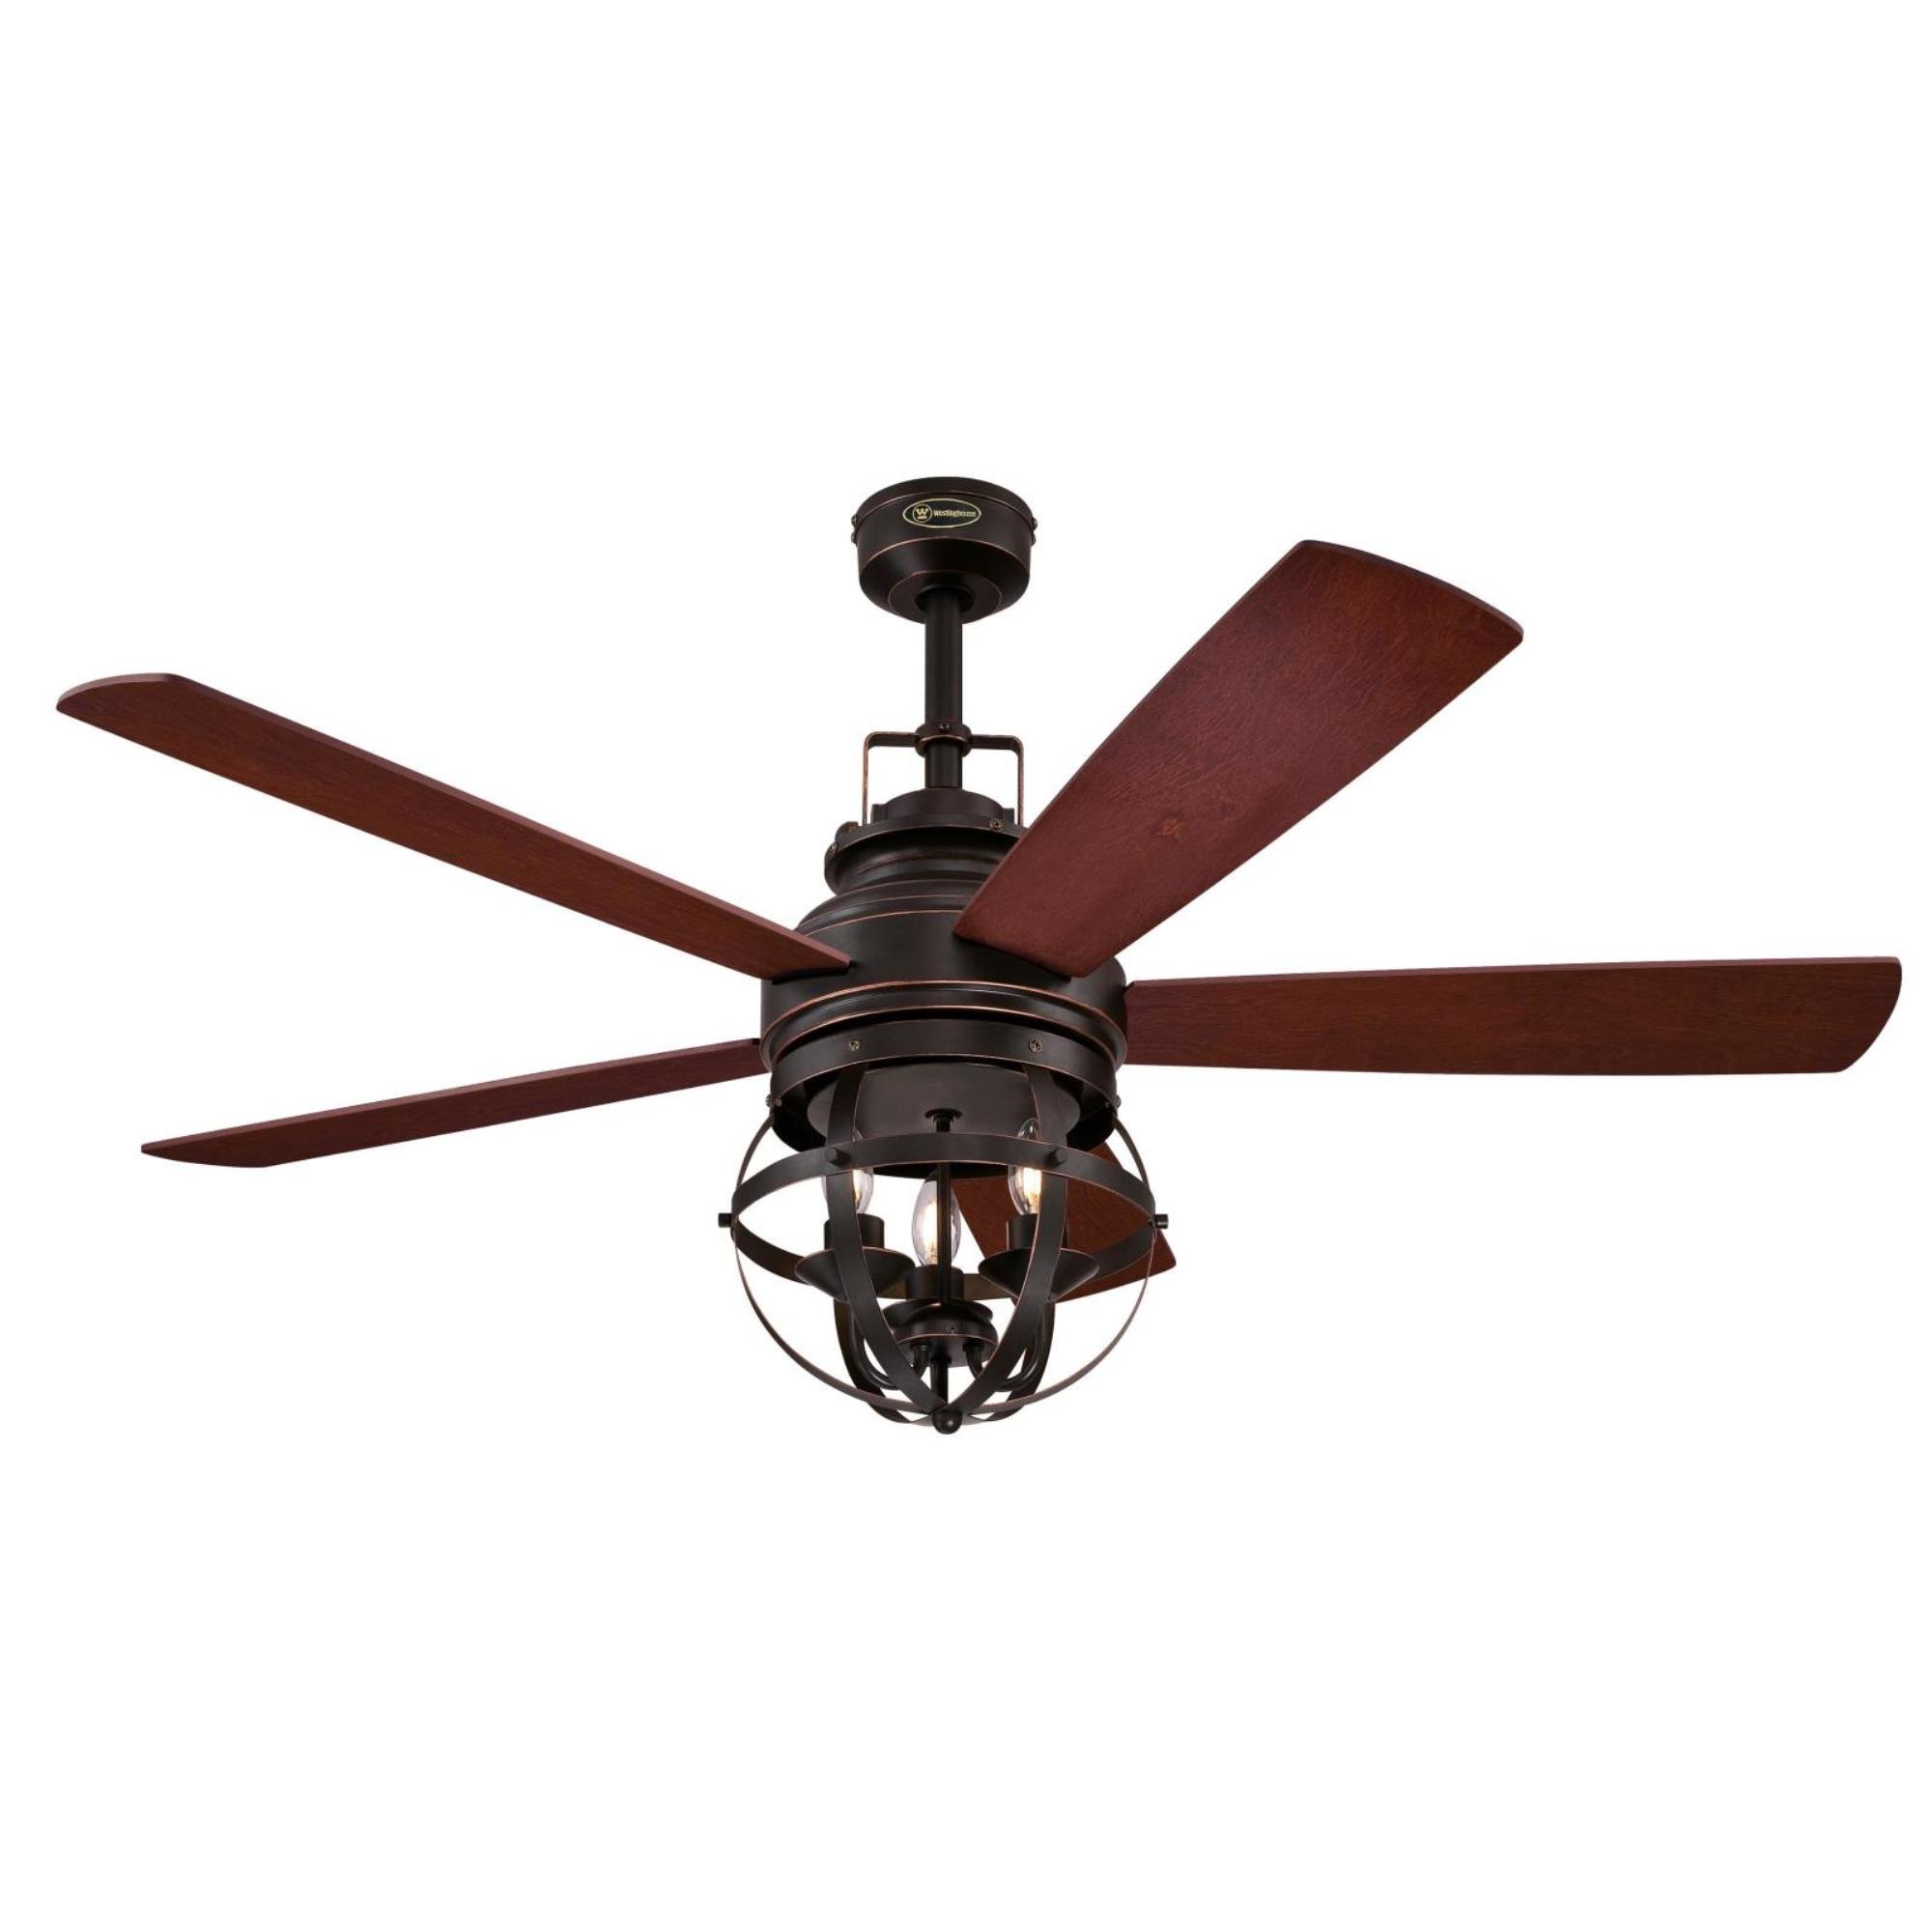 Westinghouse Lighting 7217100 Stella Mira 52-Inch Vintage Ceiling Fan, Reversible Blades, Oil Rubbed Bronze Finish